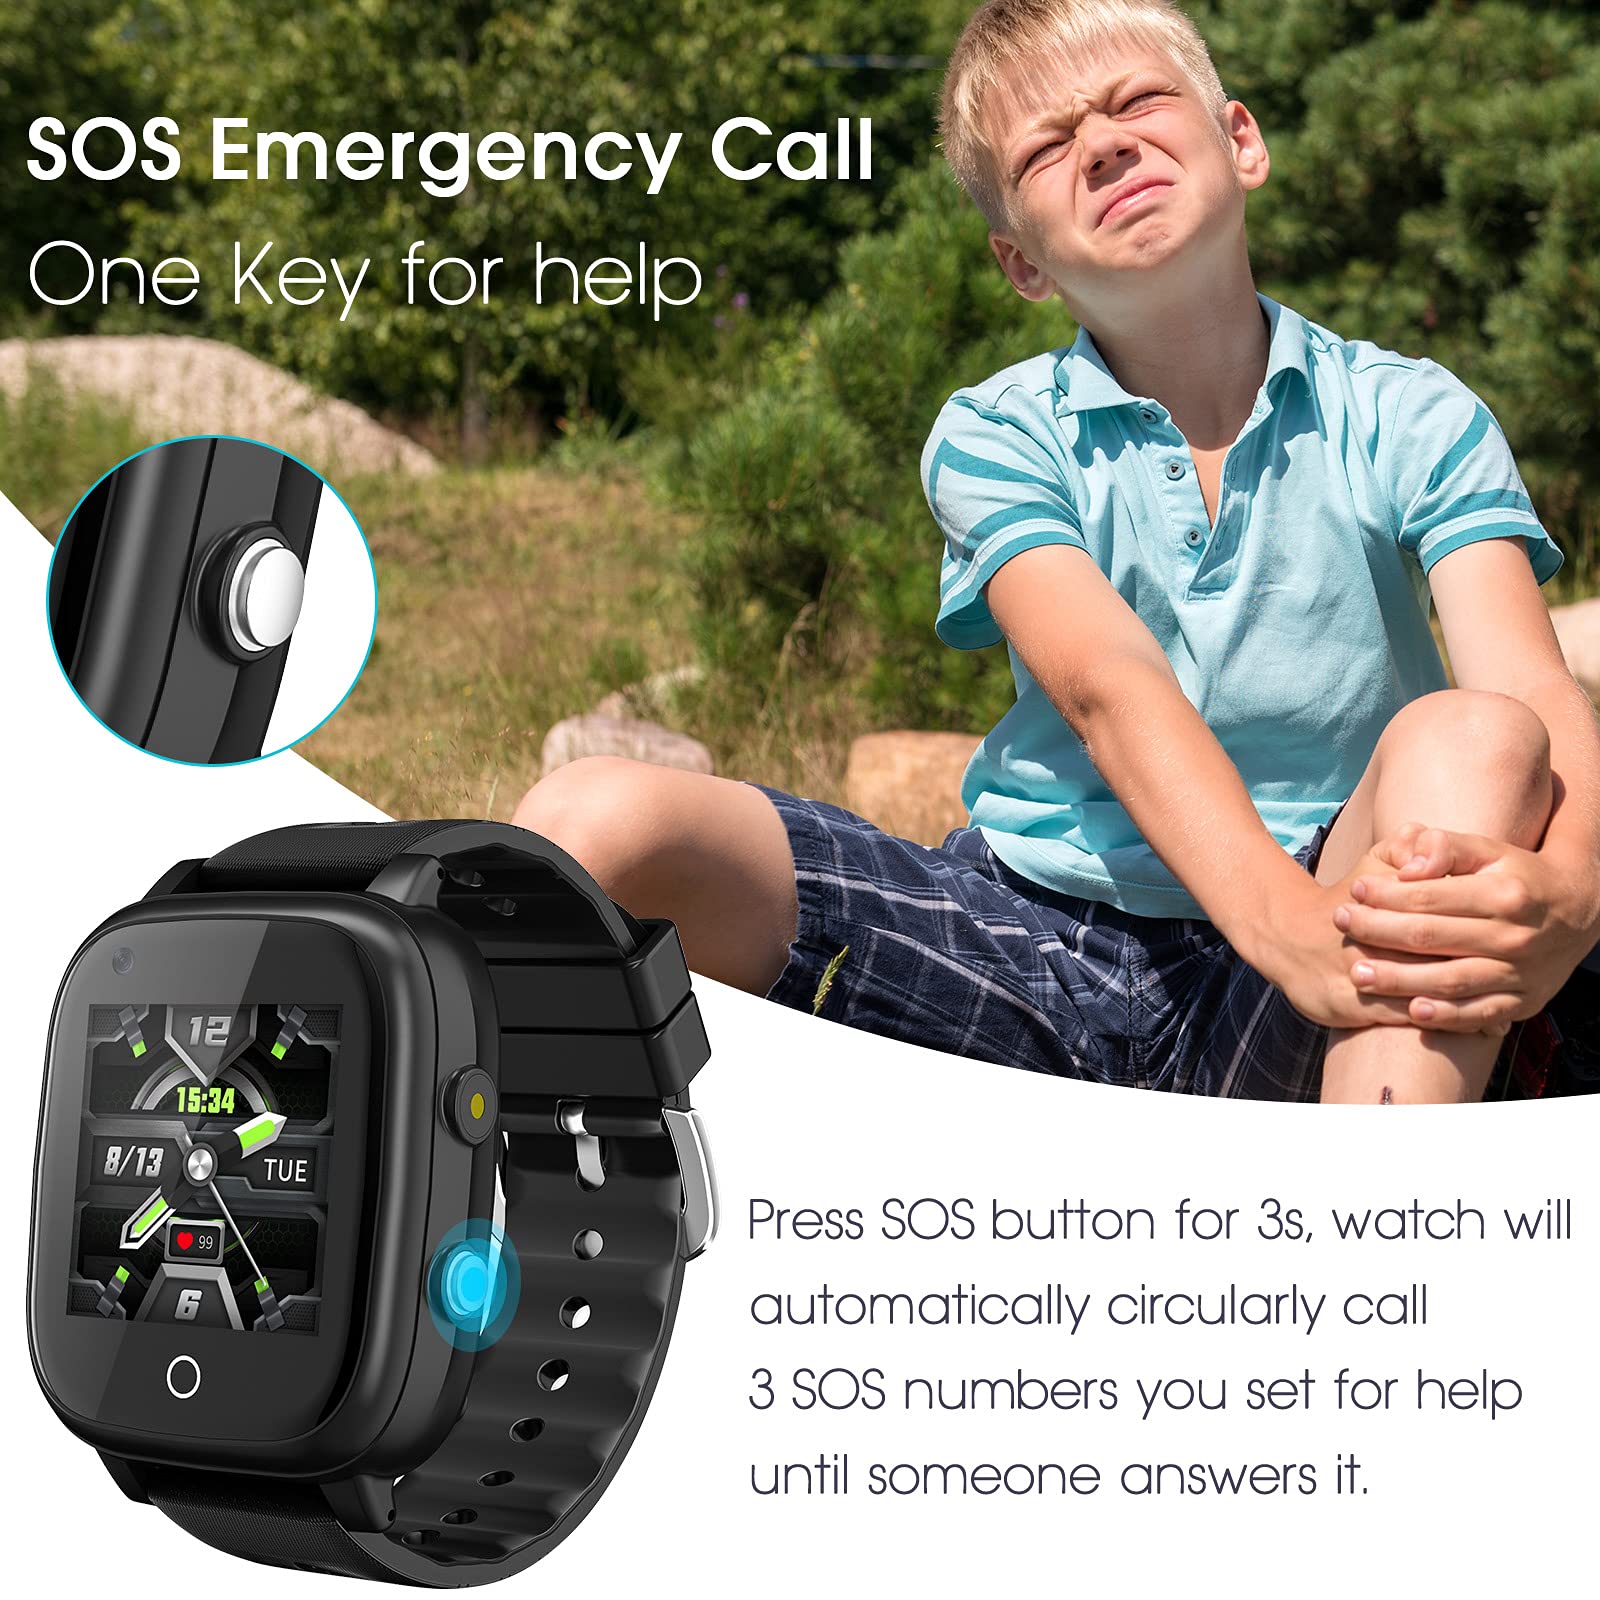 cjc 4G Kids Smart Watch with GPS Tracker and Calling, 2-Way Call Voice & Video Chat SOS Alarm WiFi Waterproof Kid Cell Phone Wrist Watch for 3-12 Girls Boys Christmas Birthday Gifts